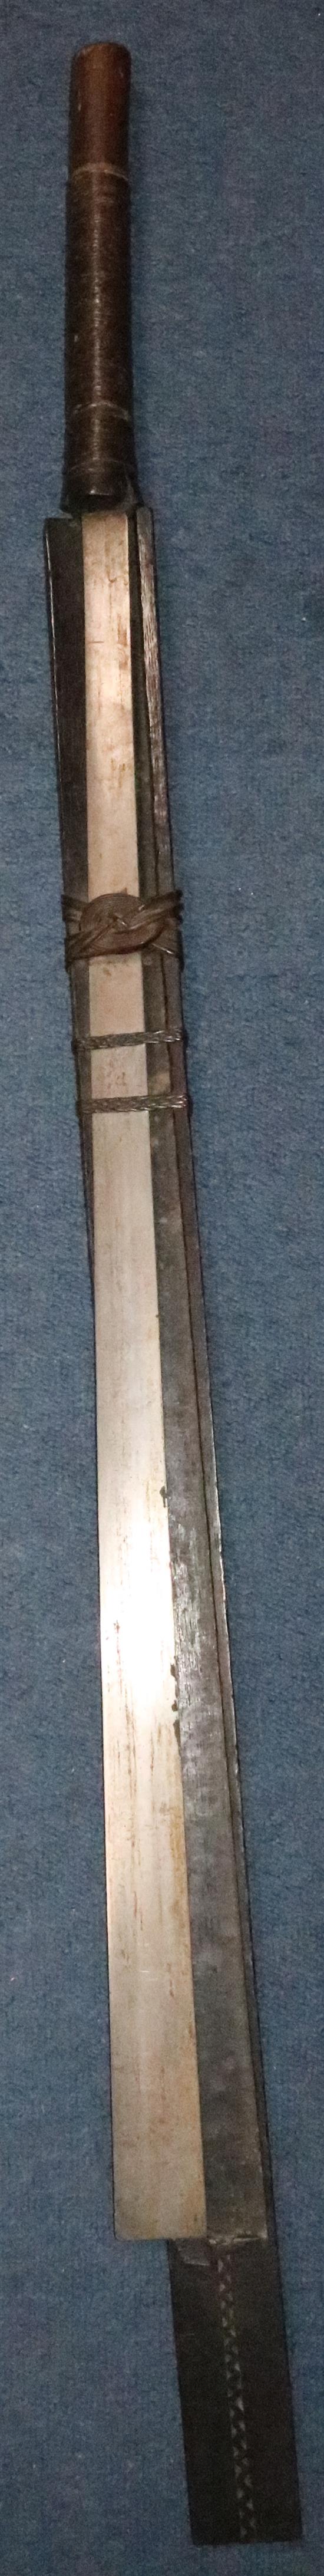 A Naga Dao sword and hardwood scabbard, Assam. 19th century, total length 114.5cm (45in.)